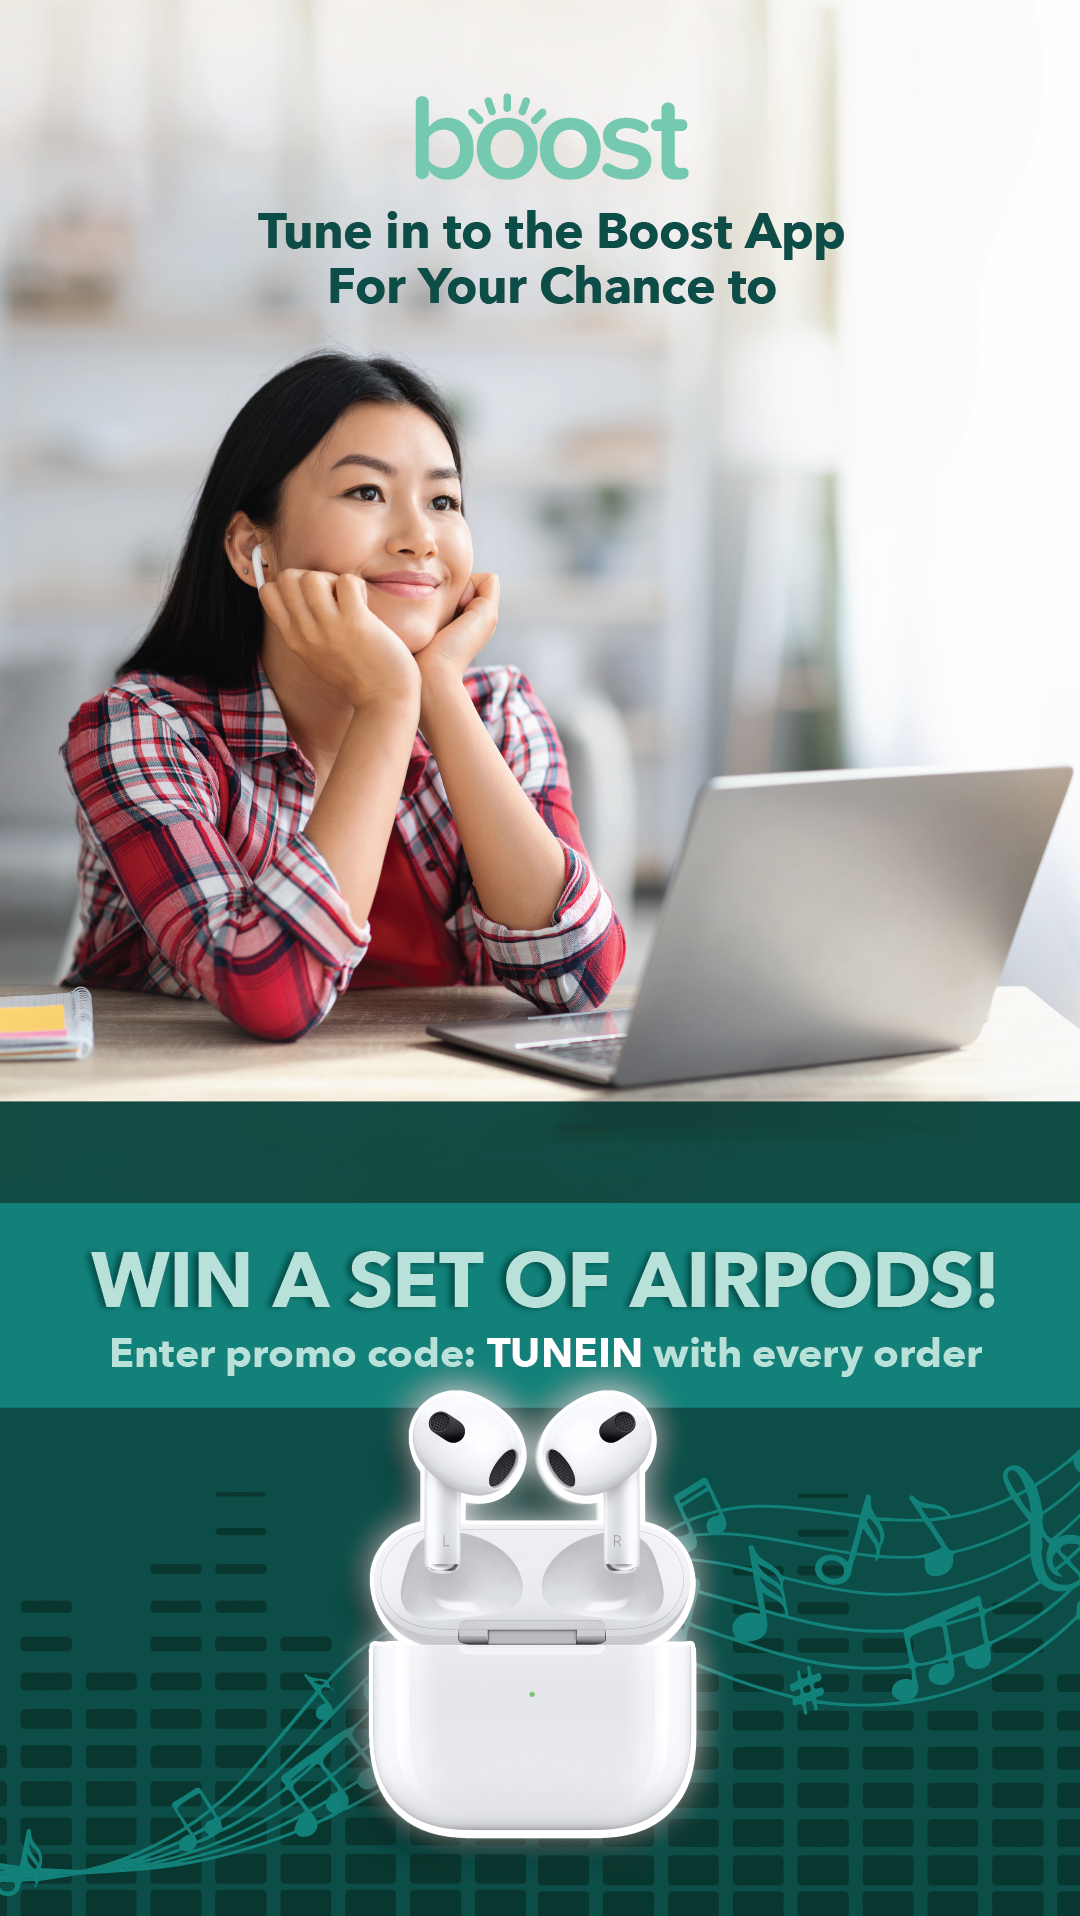 Boost Airpods Giveaway